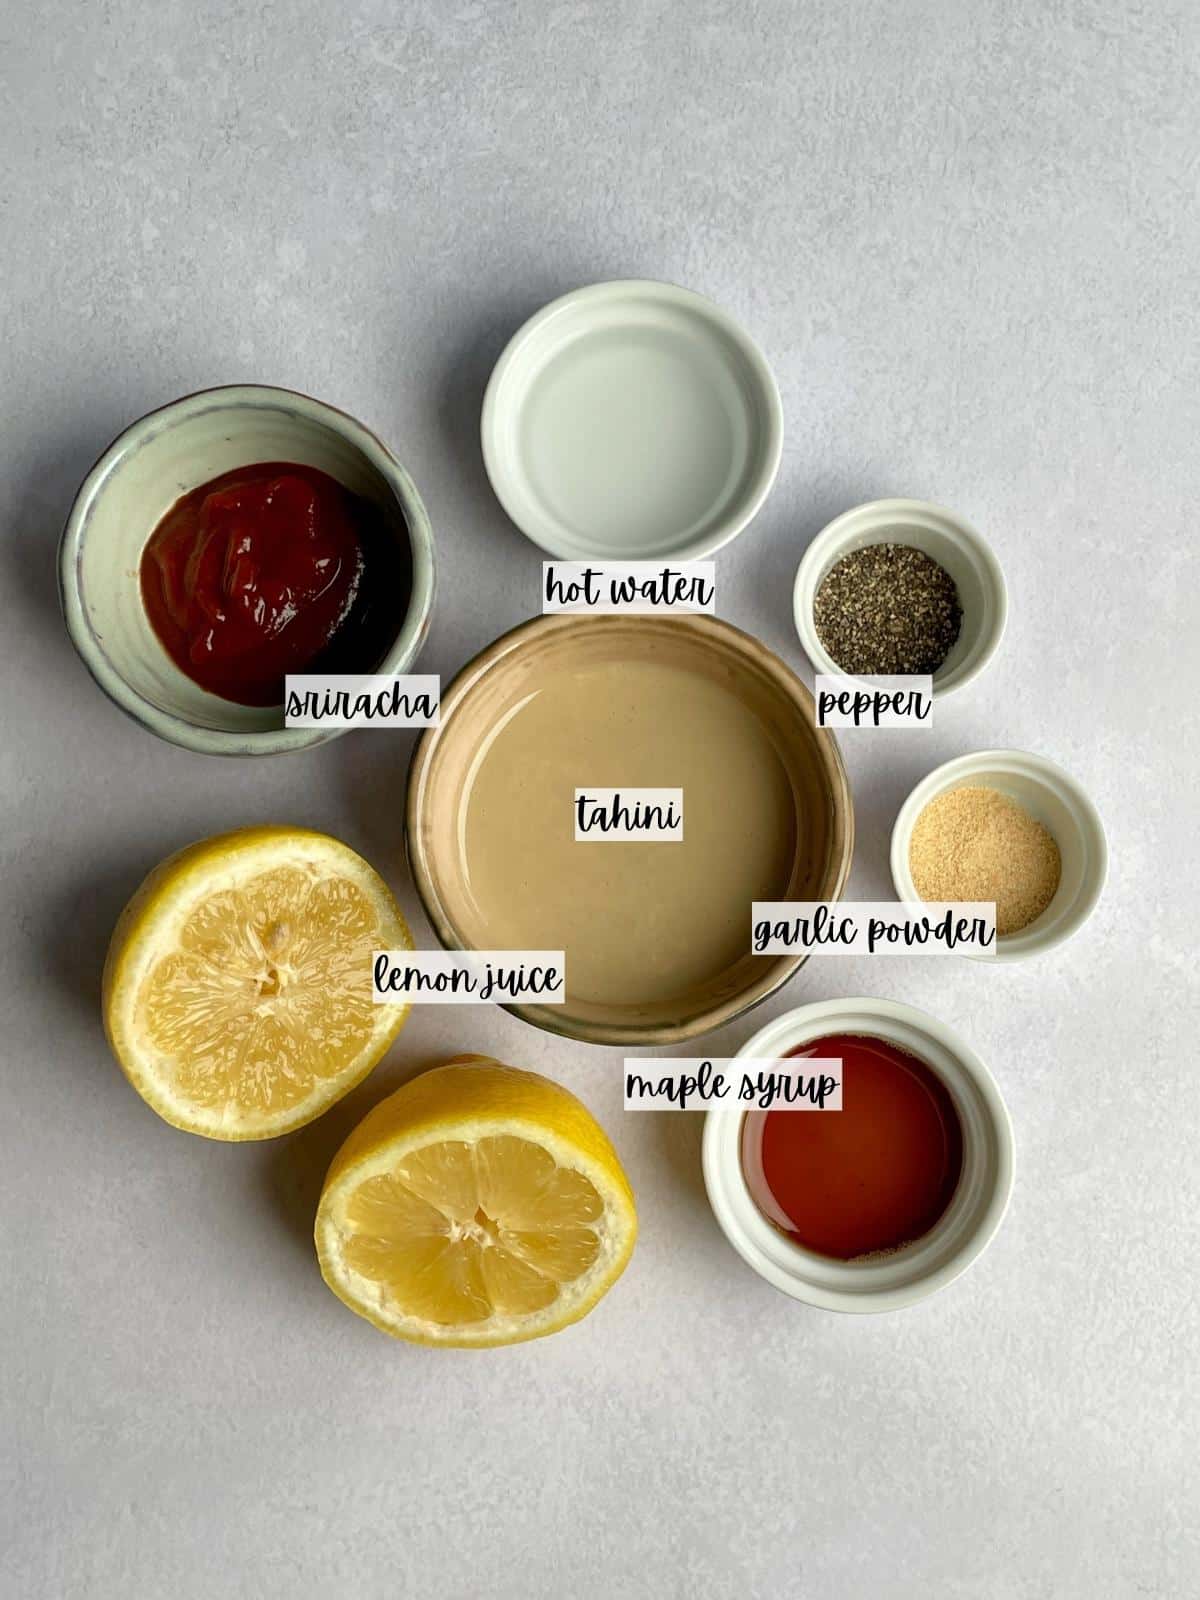 Labeled ingredients for tahini sauce.